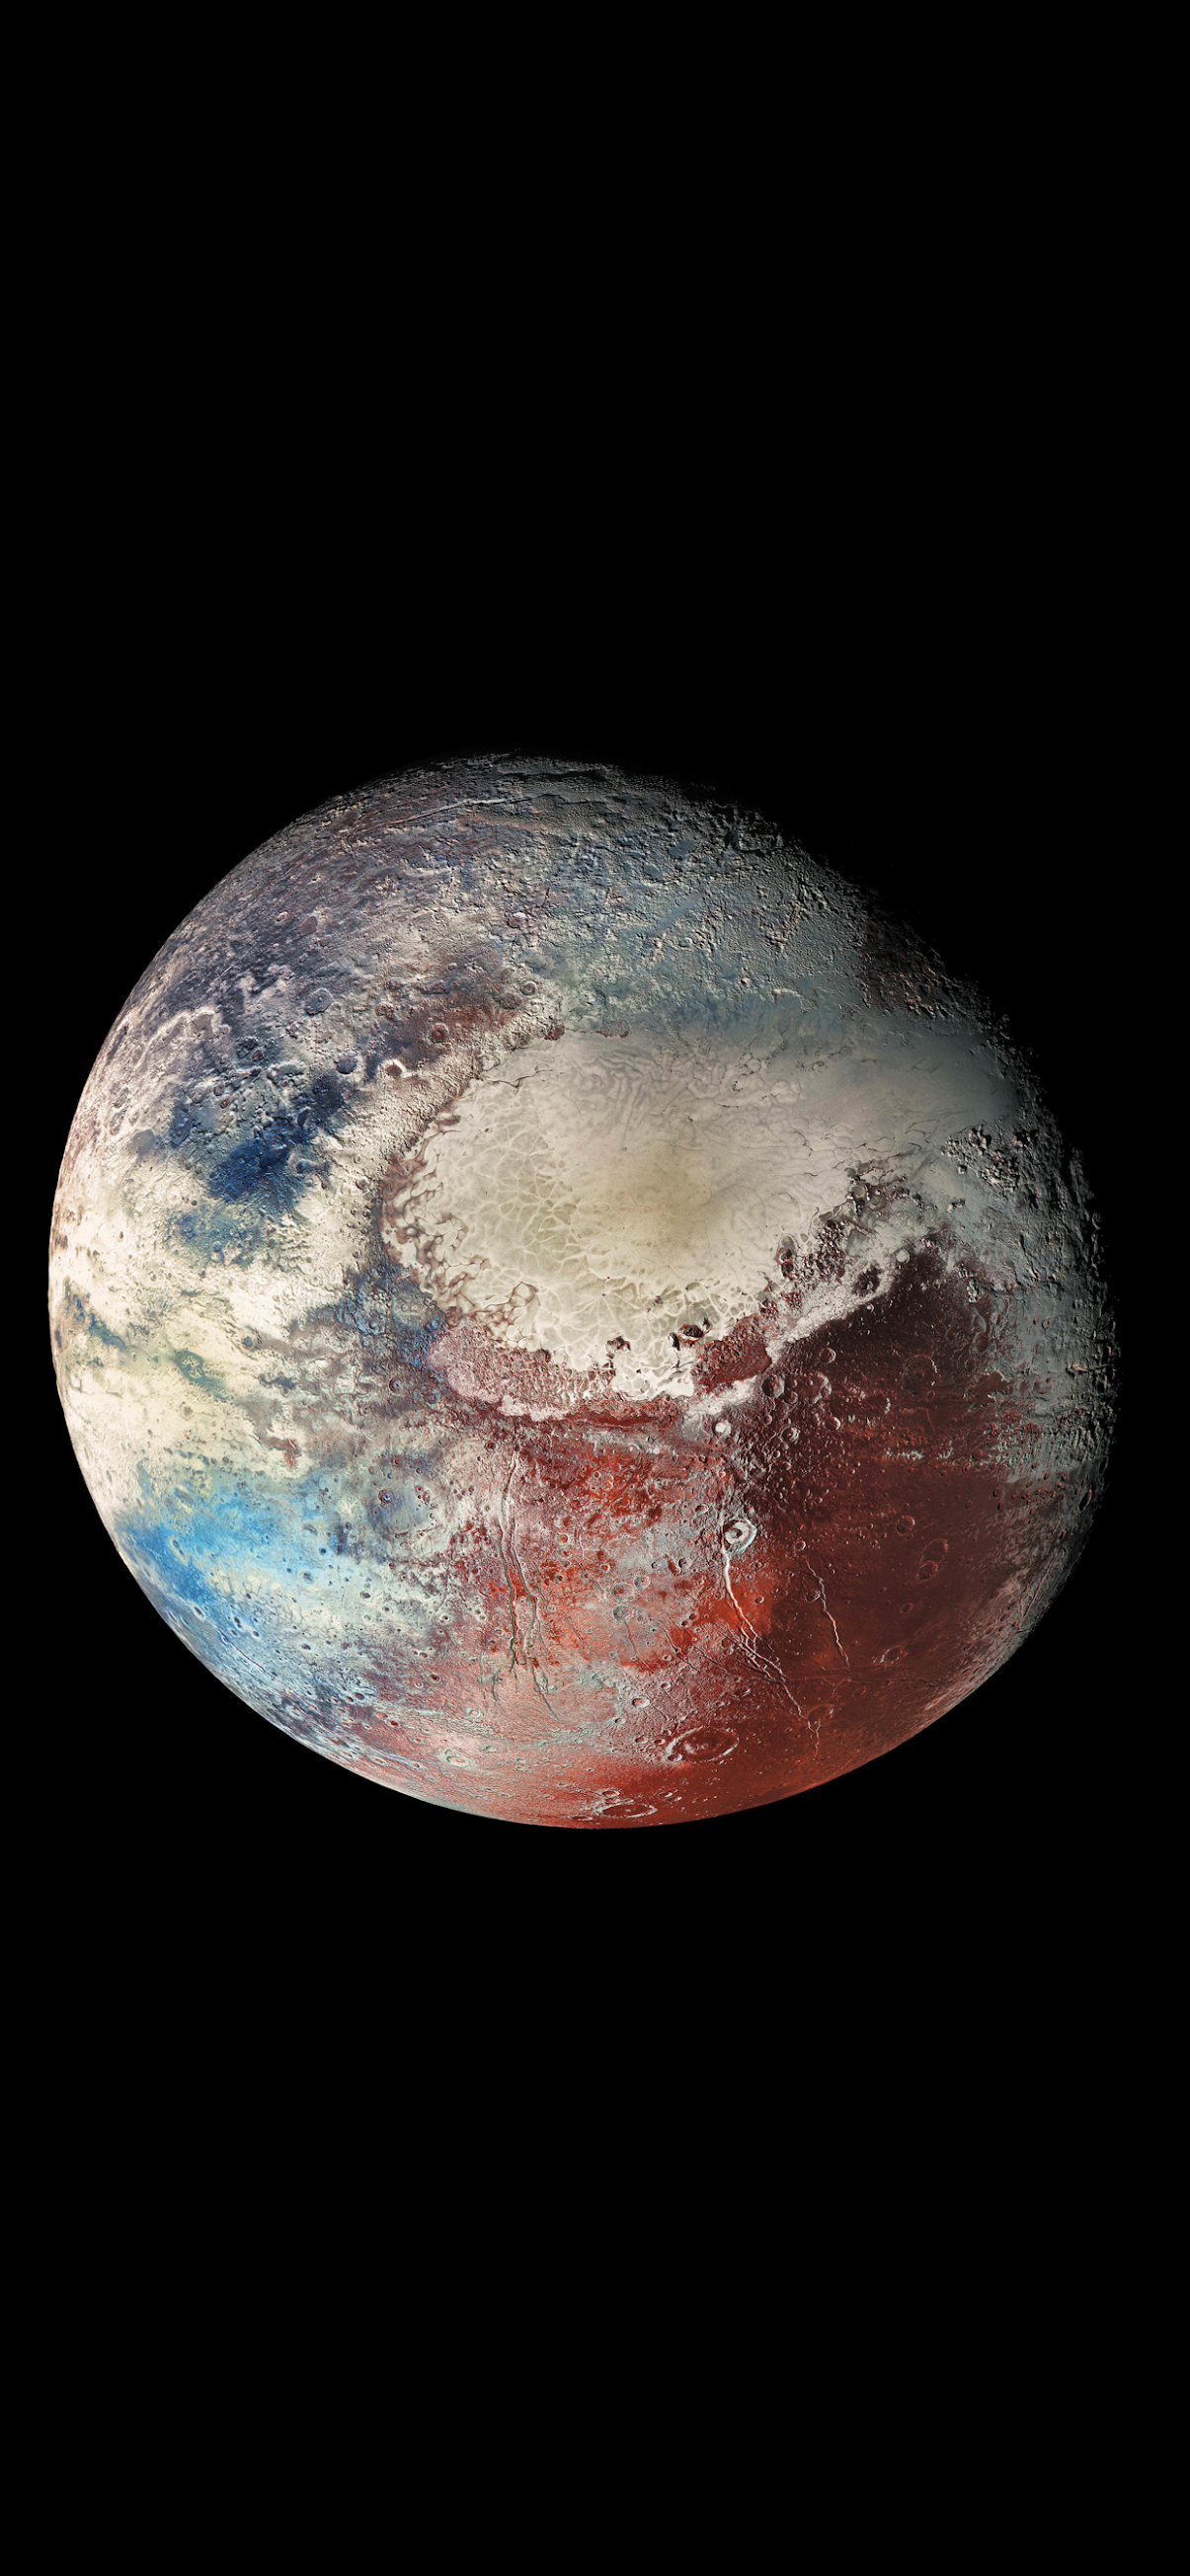 Wallpaper Earth Pluto Planet Dwarf Planet New Horizons Background   Download Free Image